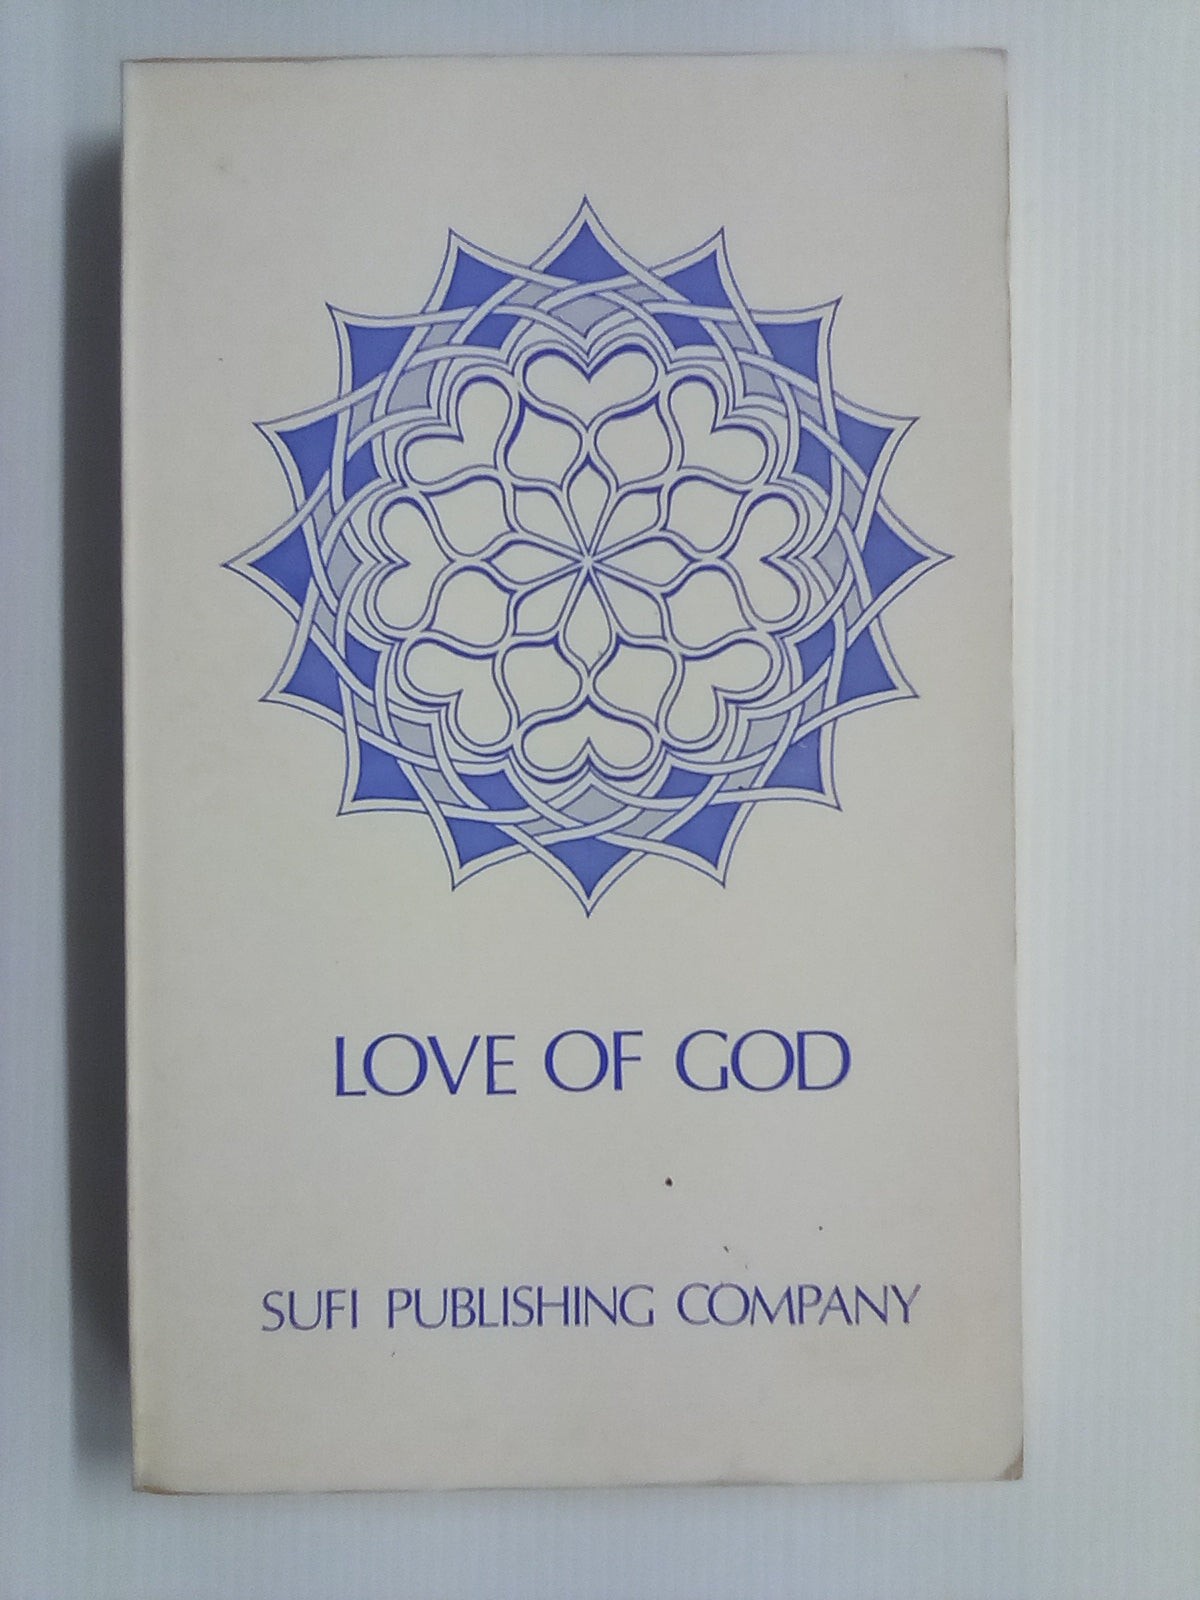 Love Of God - A Sufic Approach by Mir Valiuddin